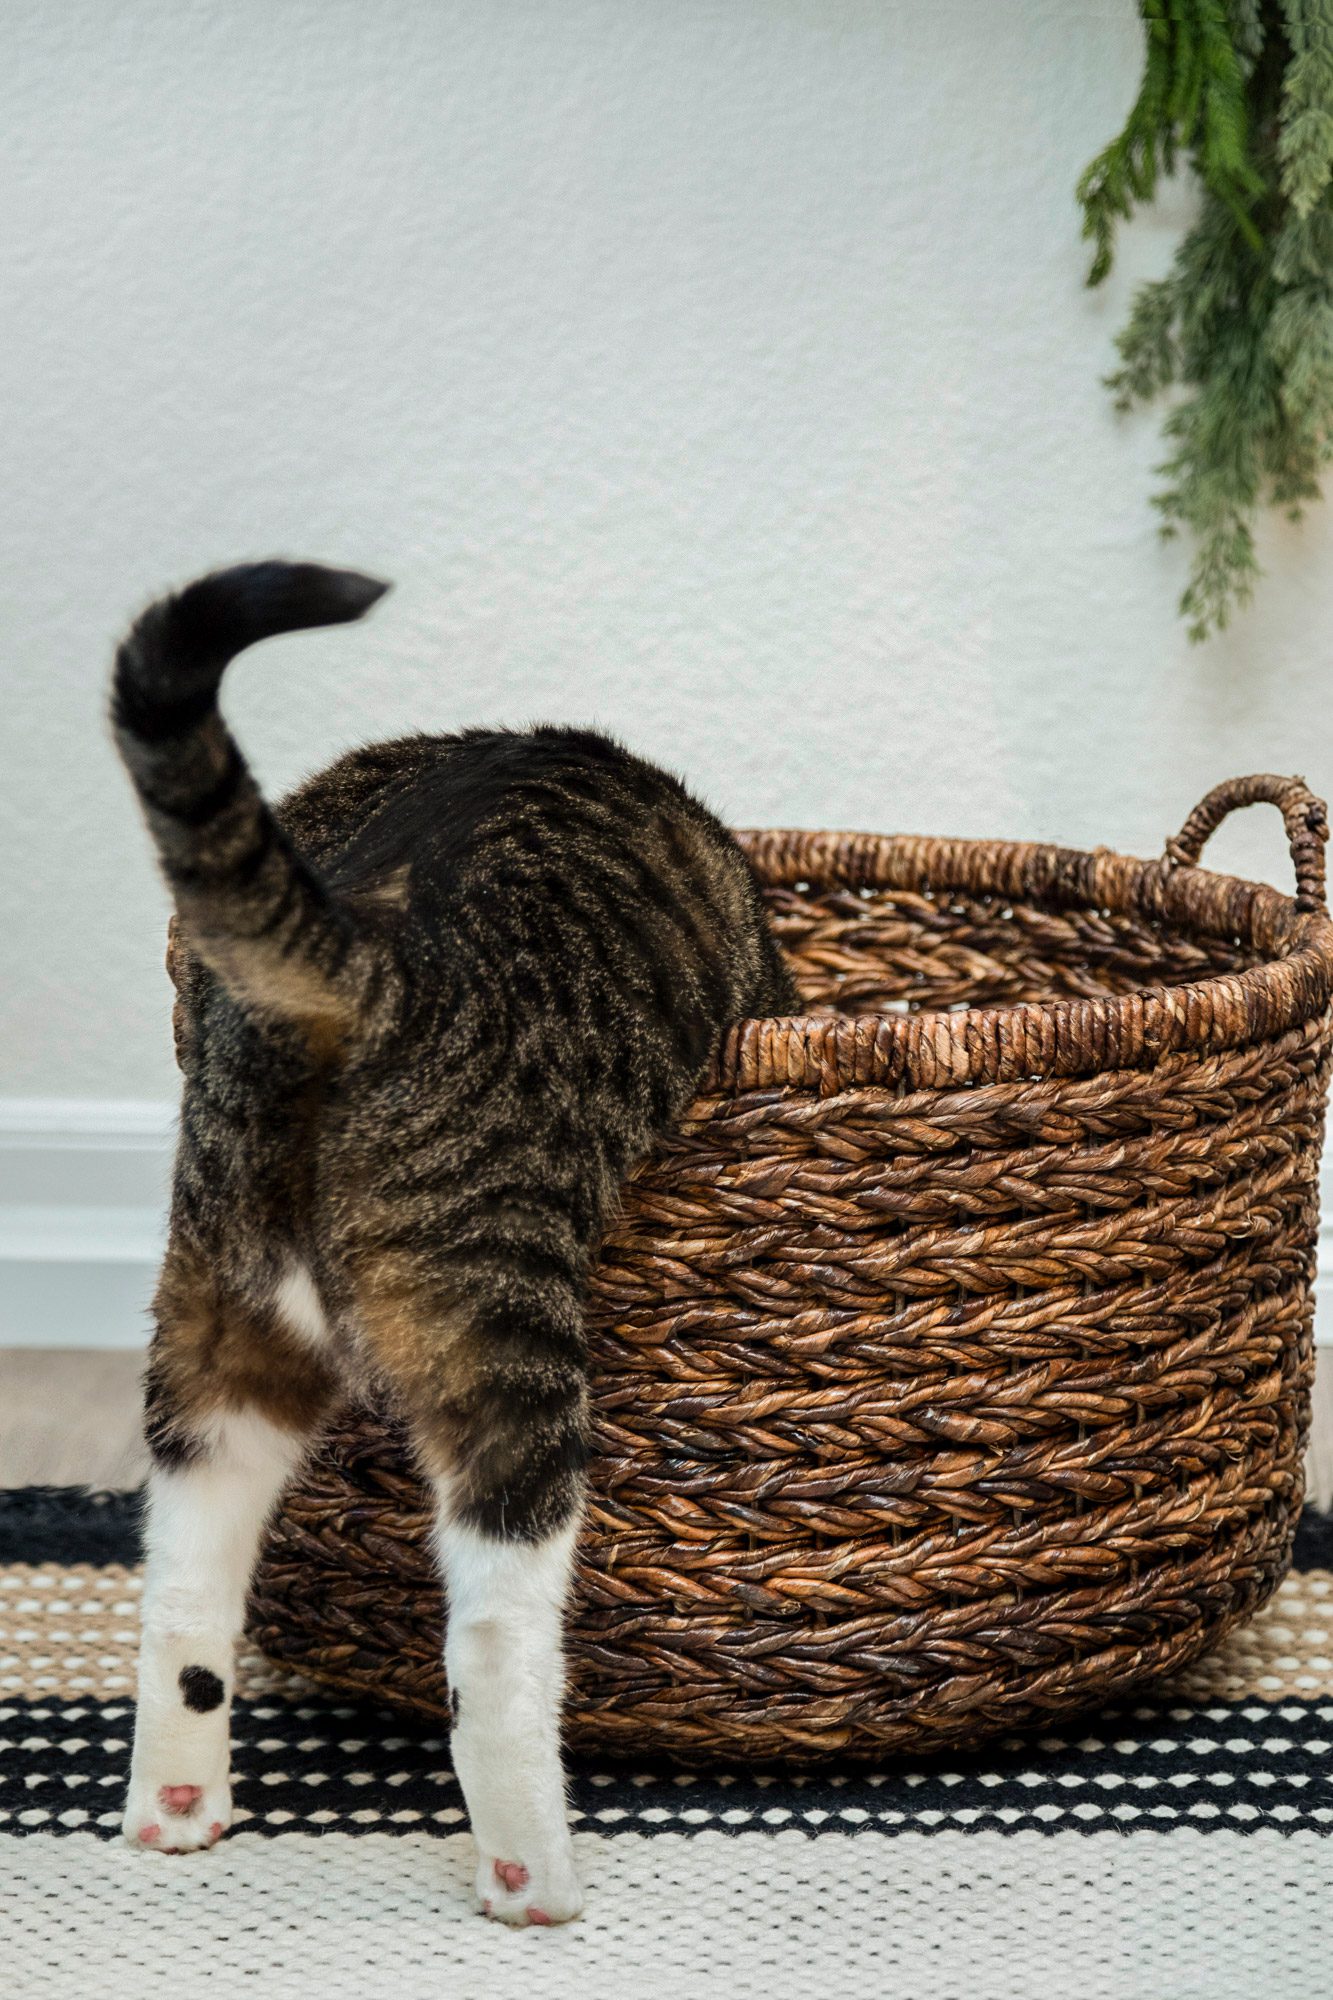 Cat getting into a basket